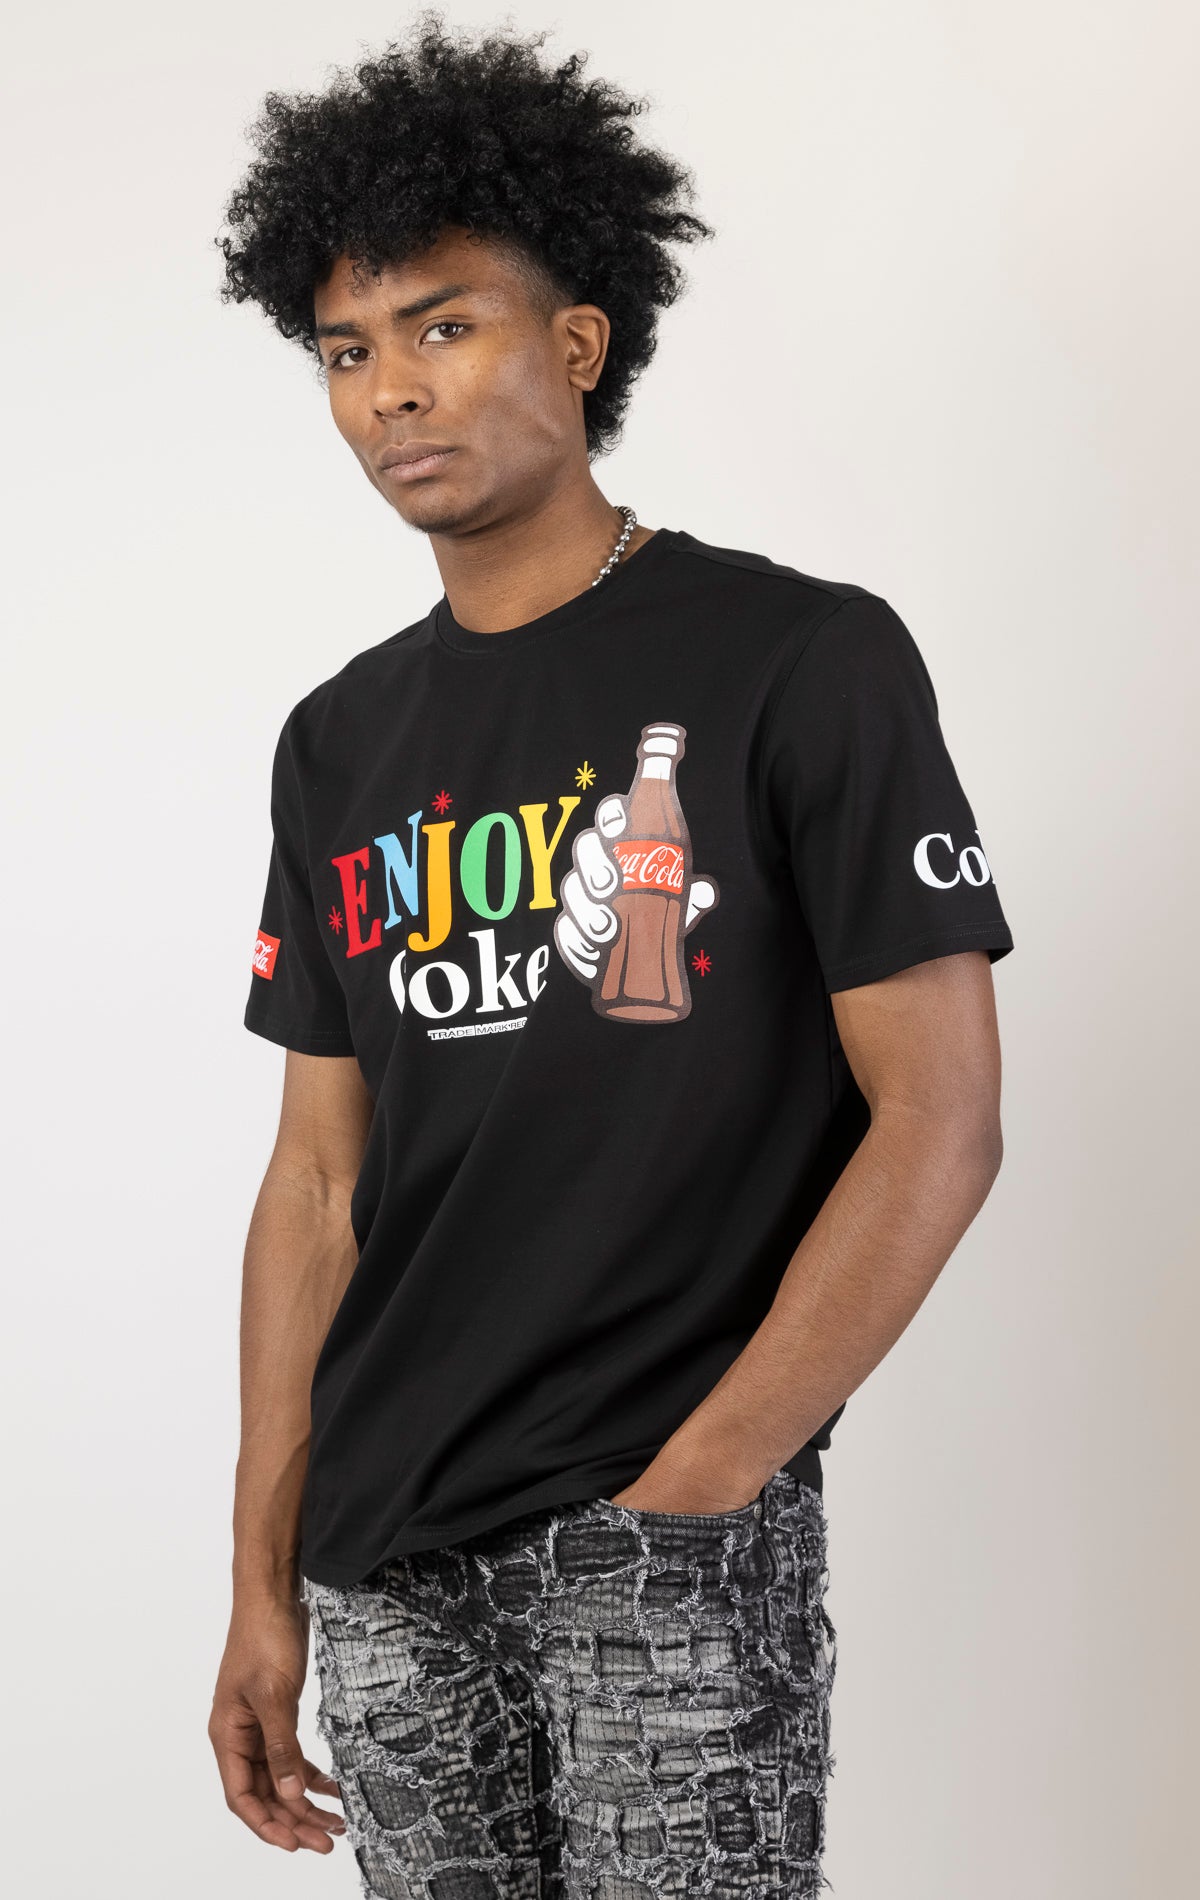 Men's black short-sleeve crew neck t-shirt in a variety of colors. The shirt features a Coca-Cola logo graphic on the front. The graphic is heat-sealed and the tee is made from a blend of 94% cotton and 6% spandex.